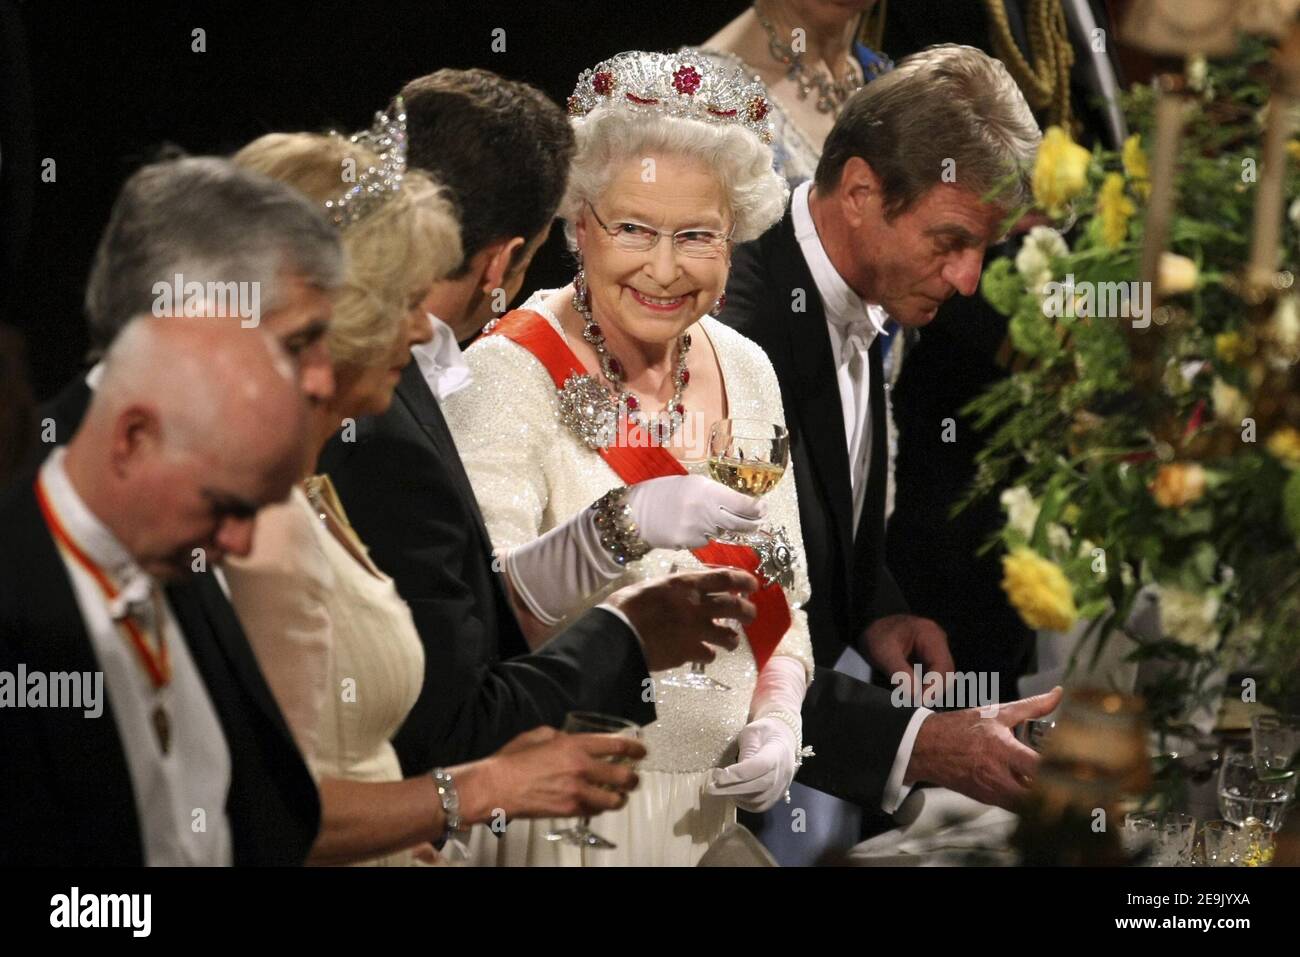 File photo dated 26/03/08 of Queen Elizabeth II, toasting with France's then President Nicolas Sarkozy at the start of a state banquet at Windsor Castle in Windsor. The Queen will have reigned as monarch for 69 years on Saturday. Stock Photo